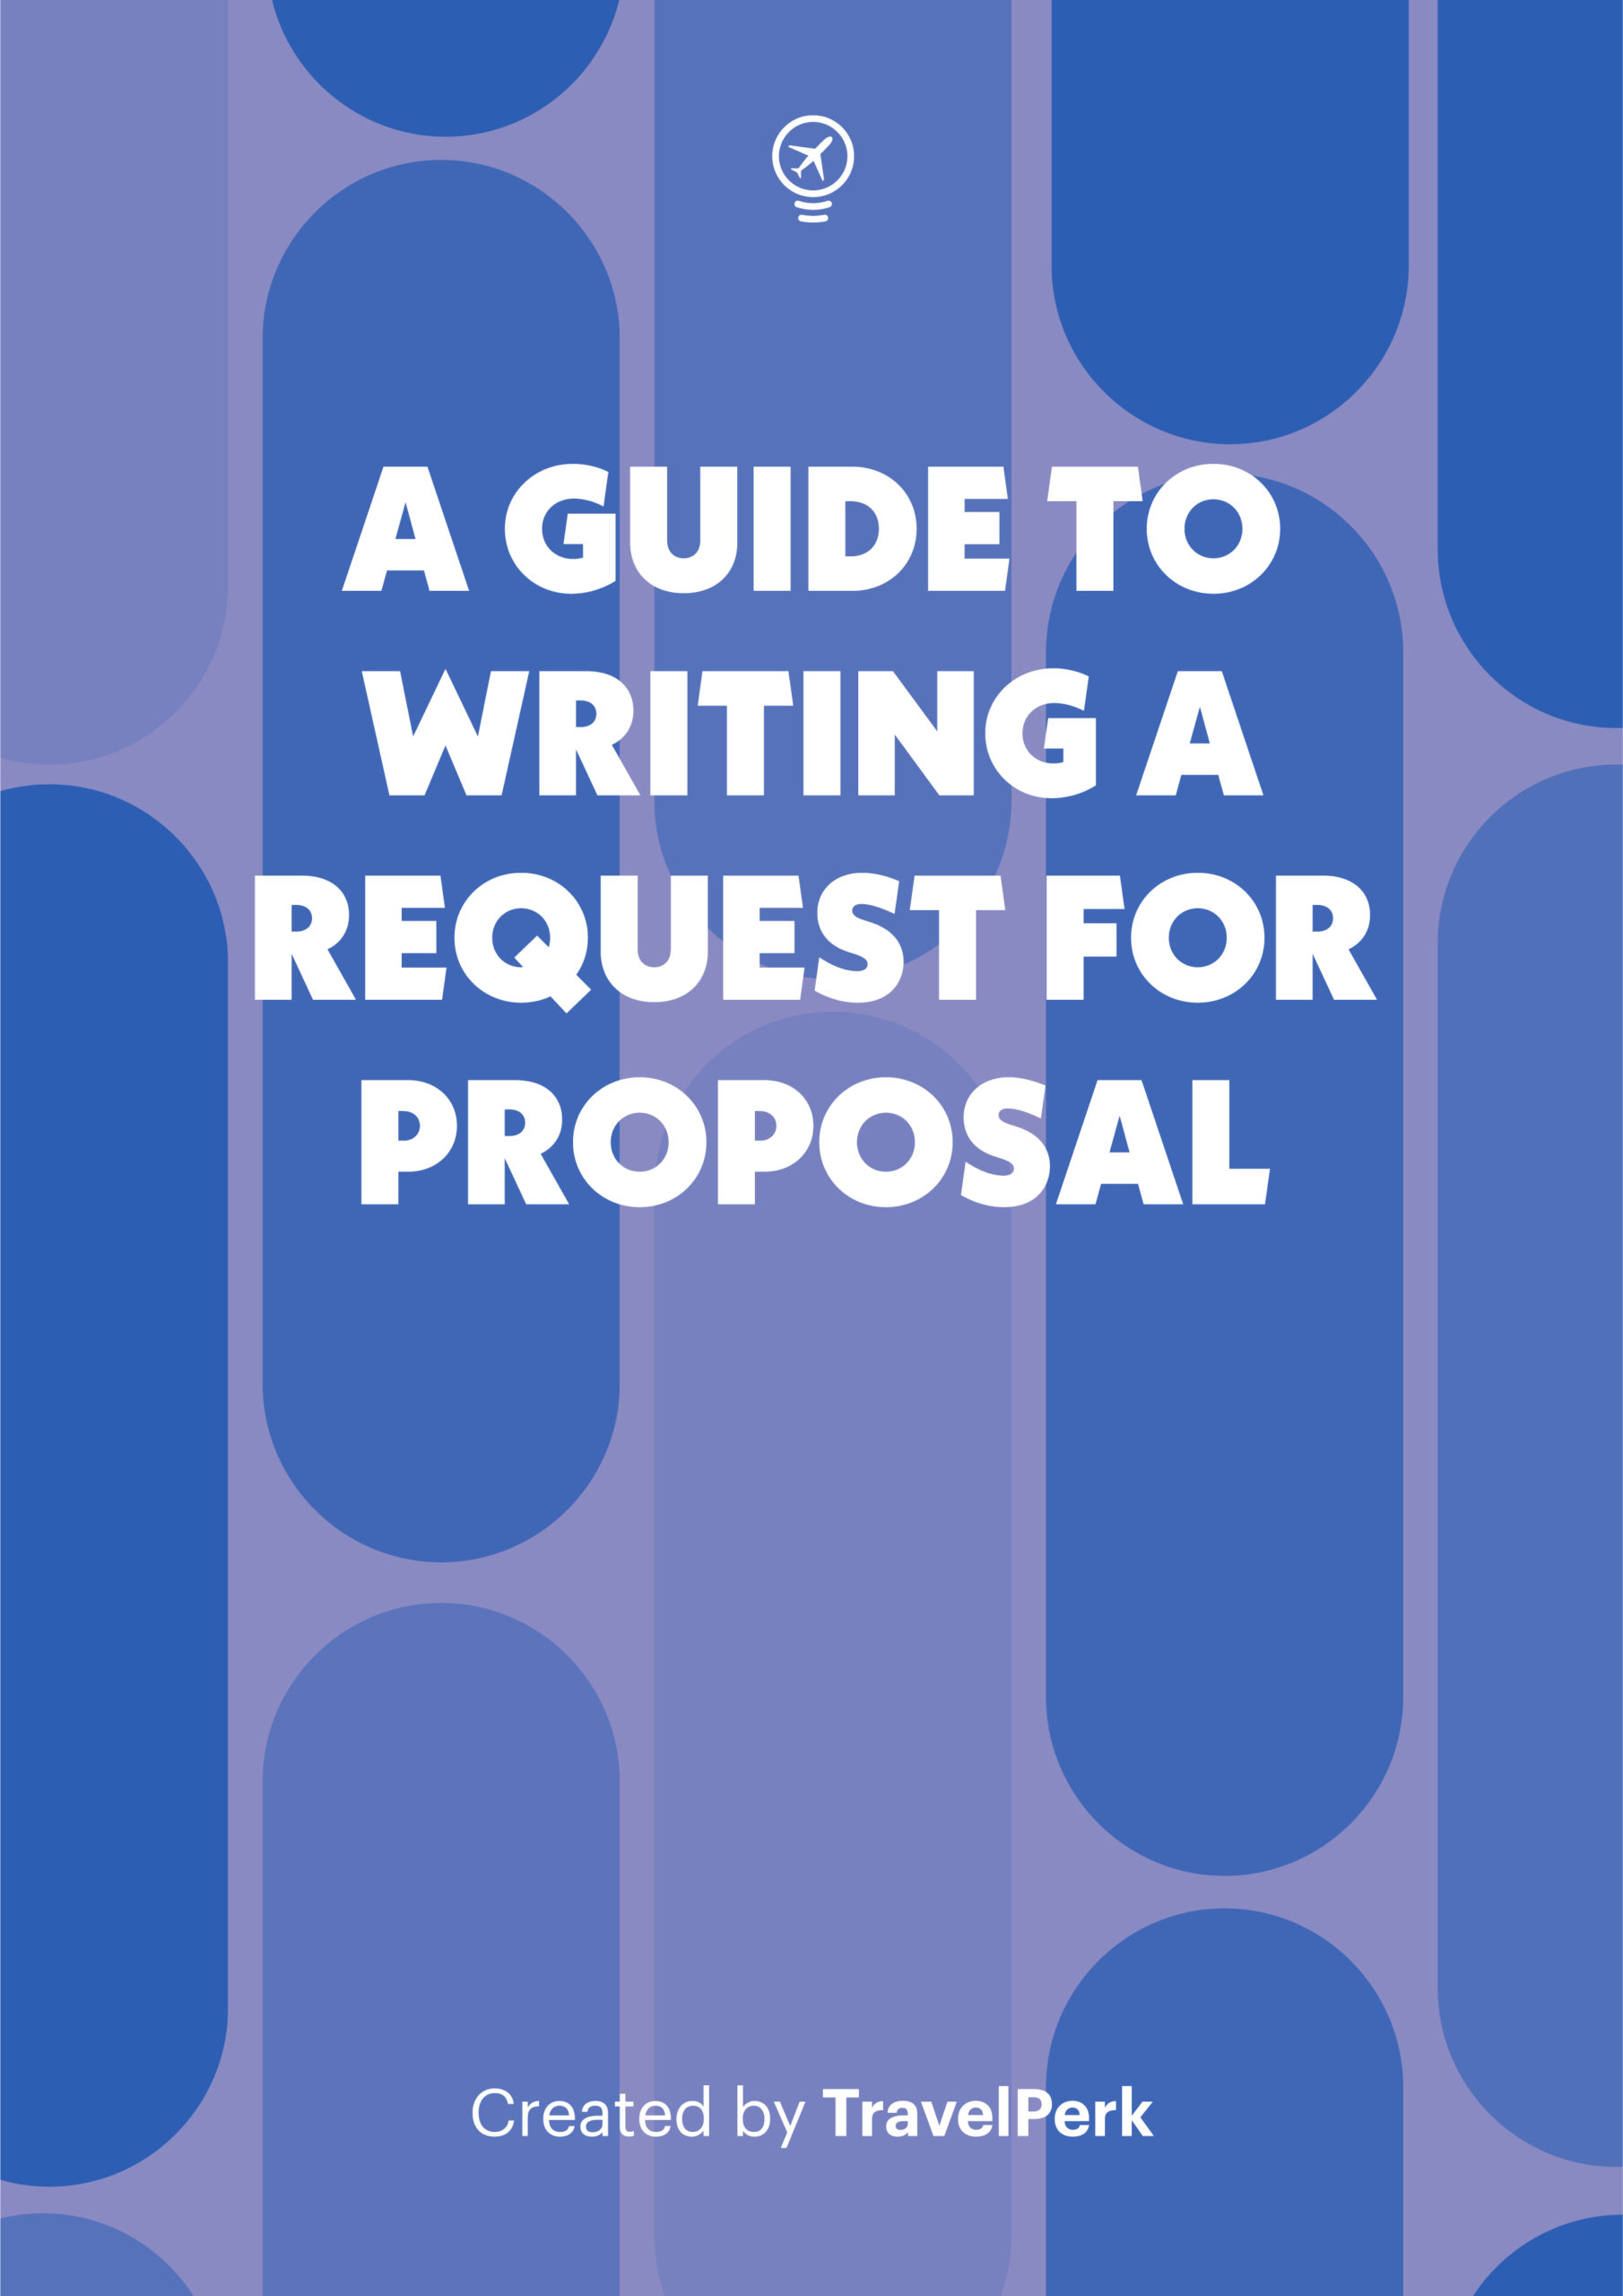 Learn how to write a Request For Proposal for a travel management service